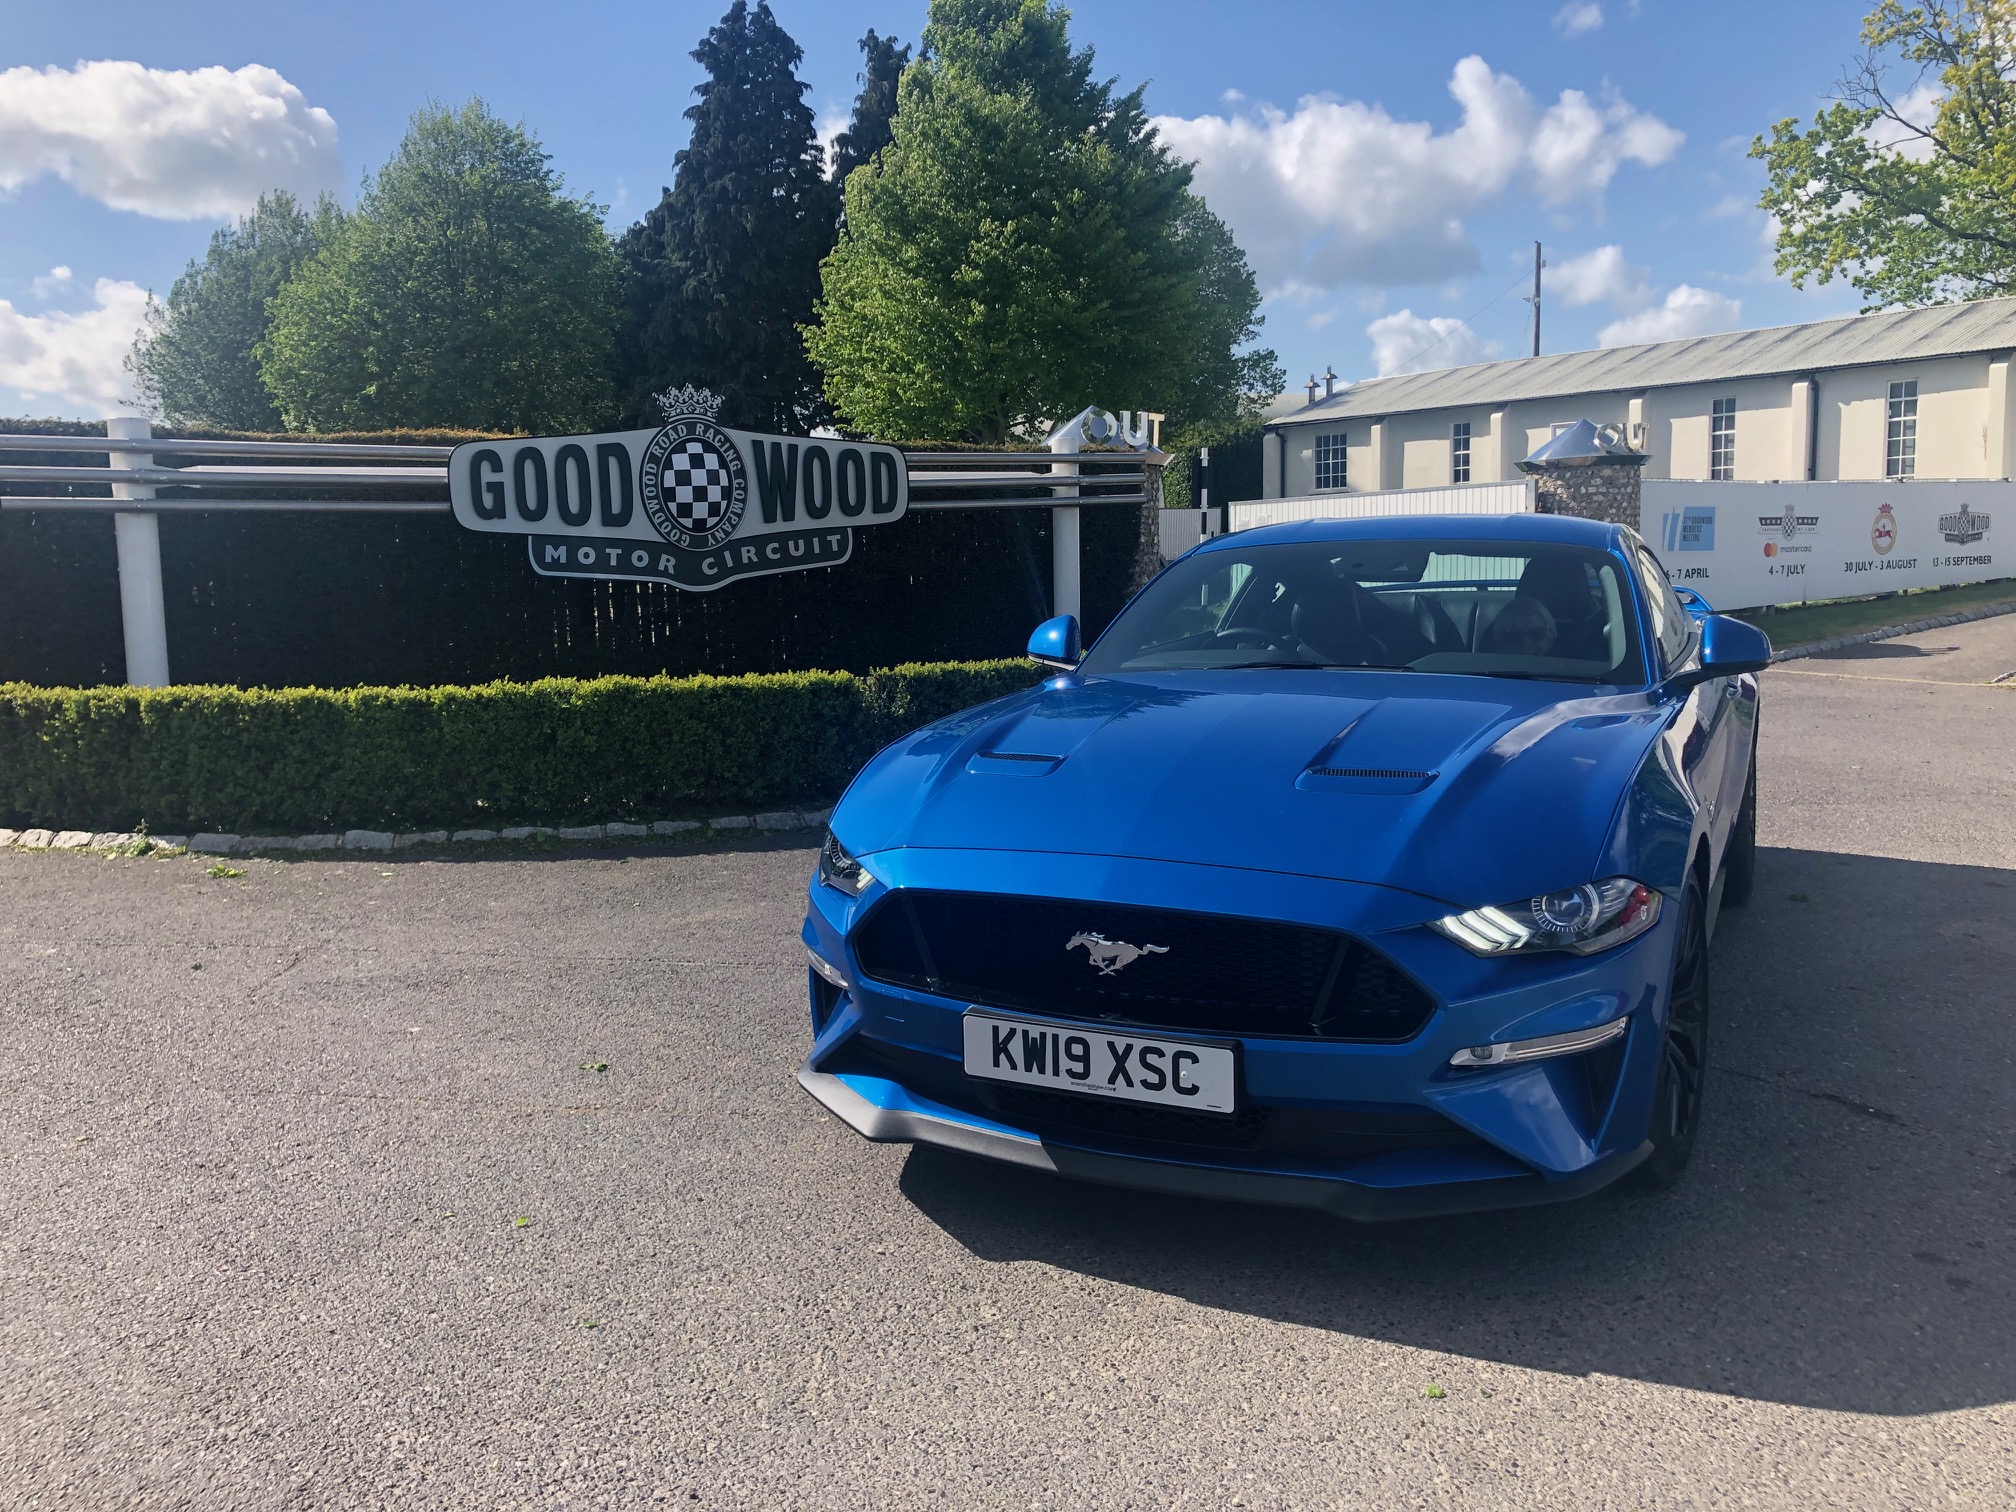 2019 Ford Mustang GT - Page 2 - Readers' Cars - PistonHeads